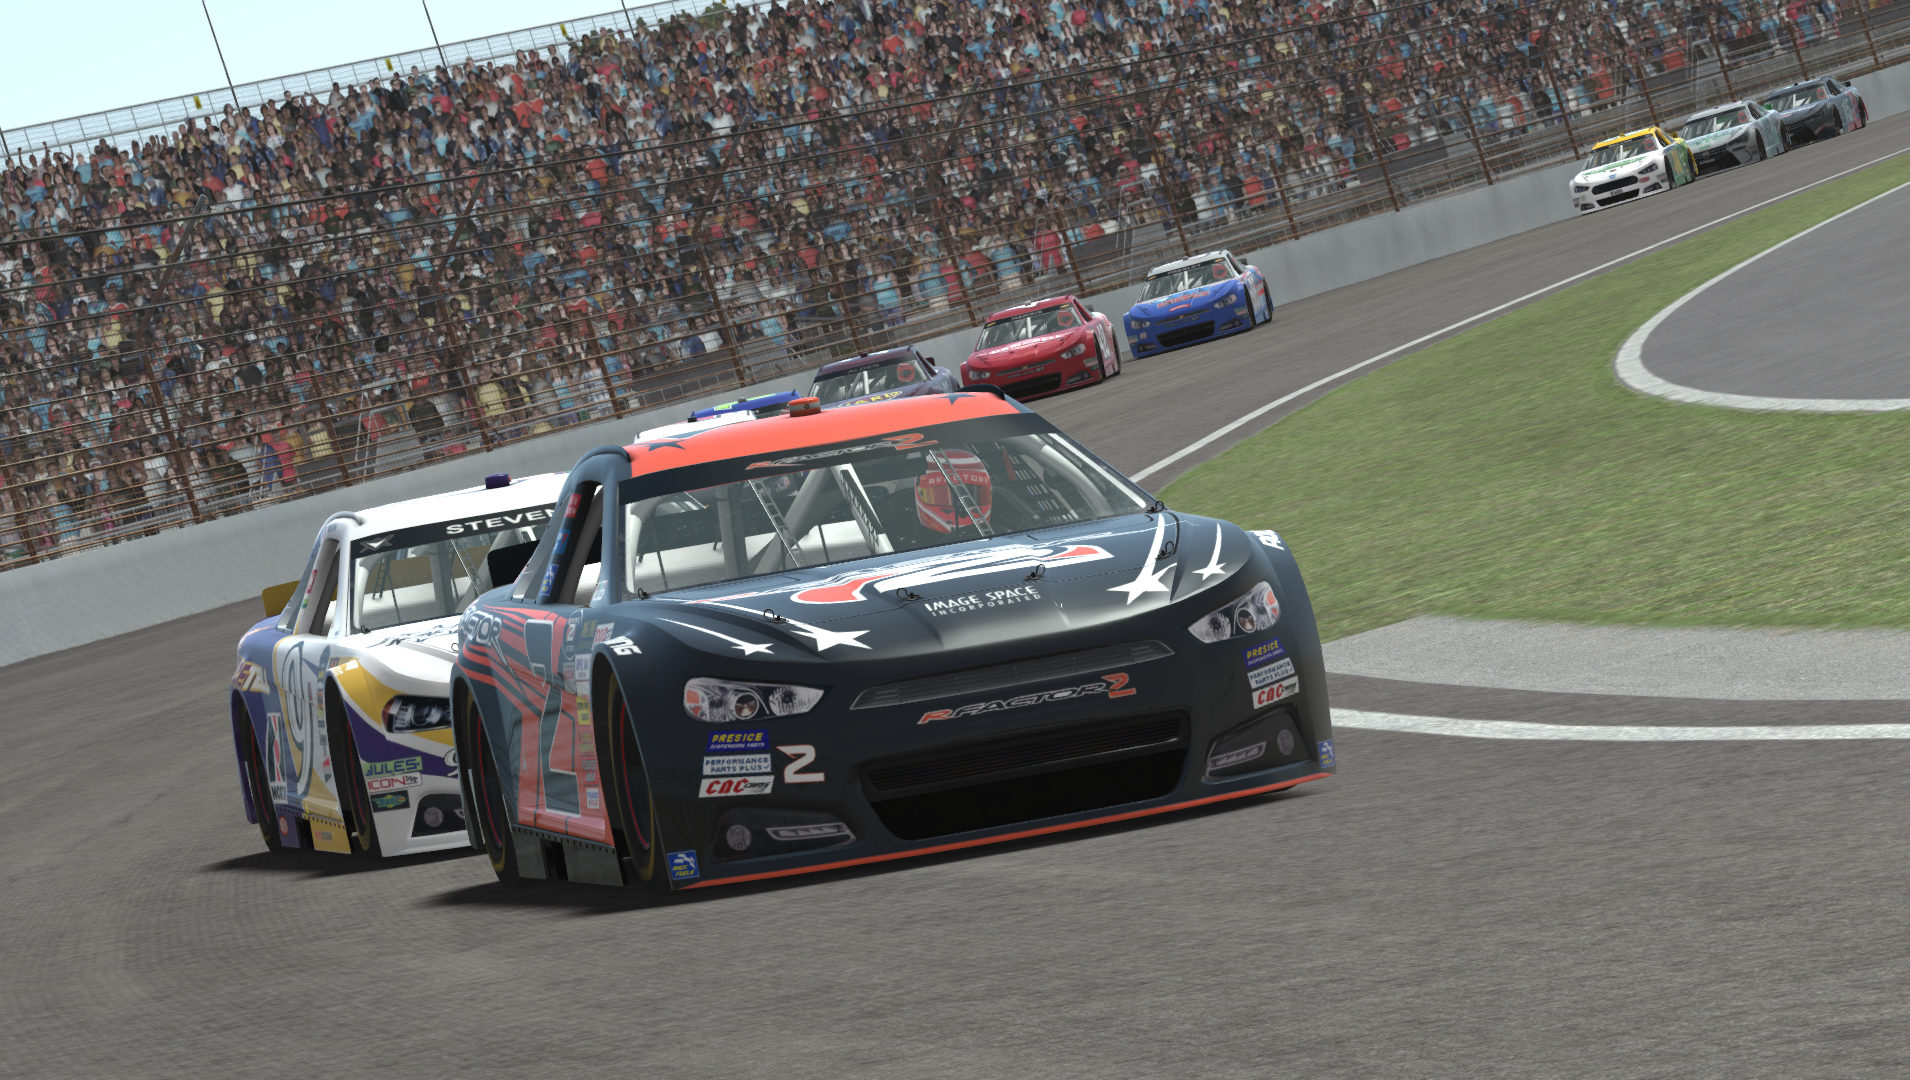 Best racing games - stock cars racing around a track